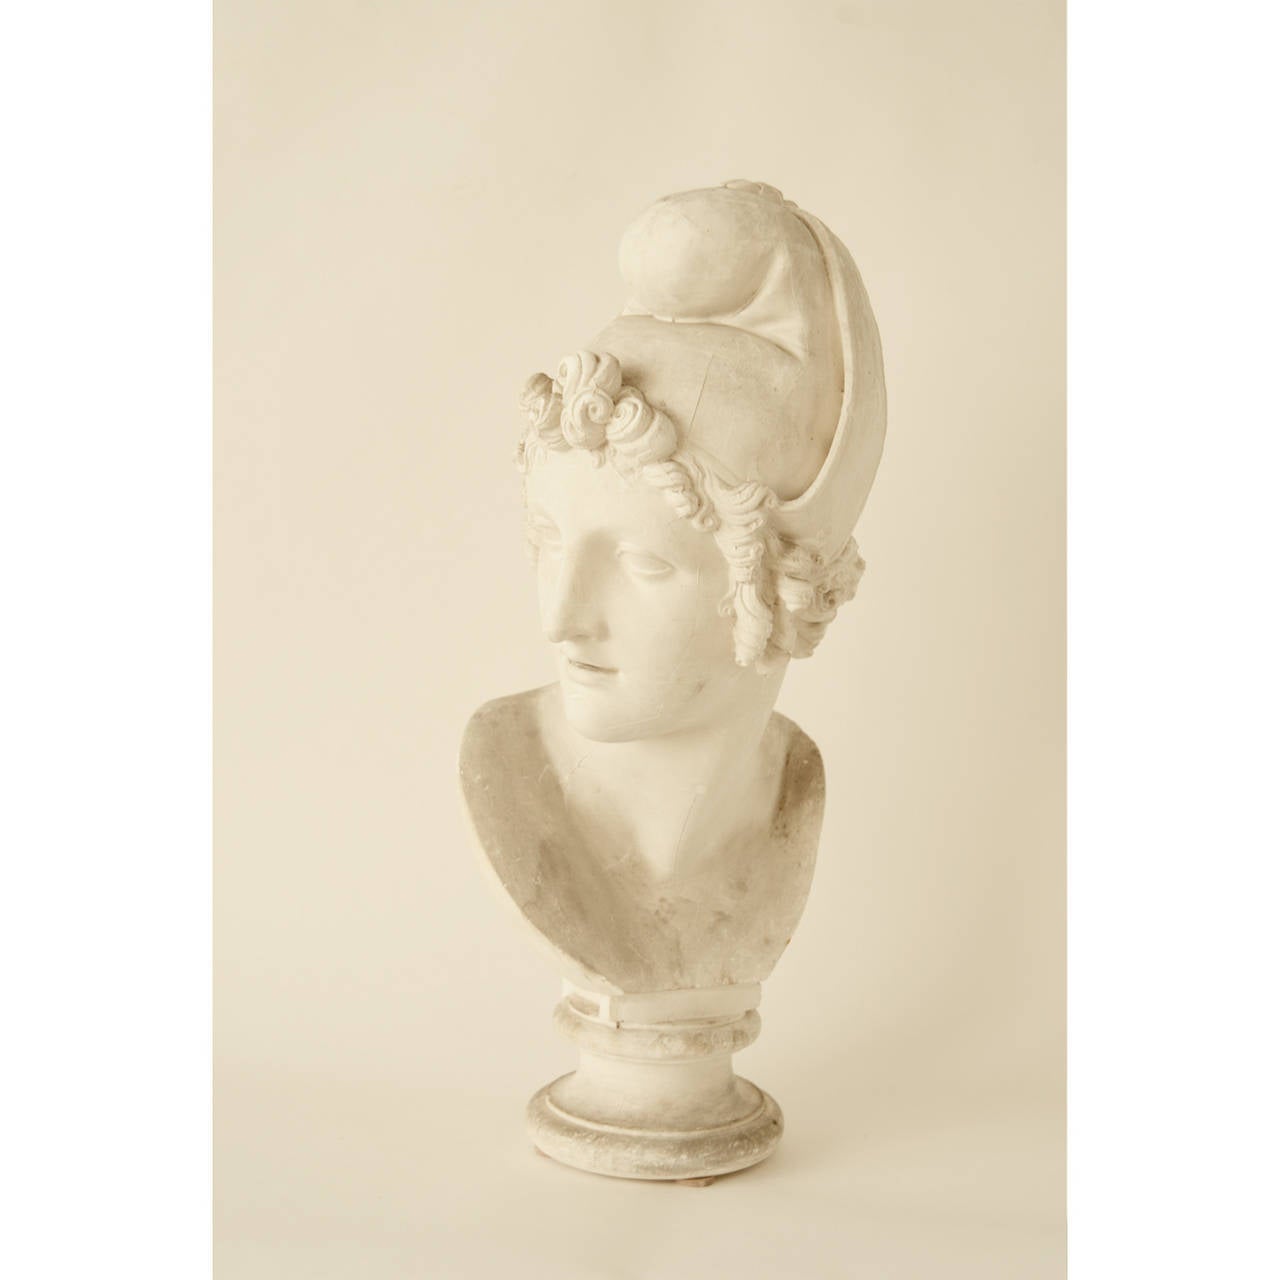 Early 20th c. Cast Plaster Bust of a Man, Based on an Earlier Statue. Distressed Aesthetic.